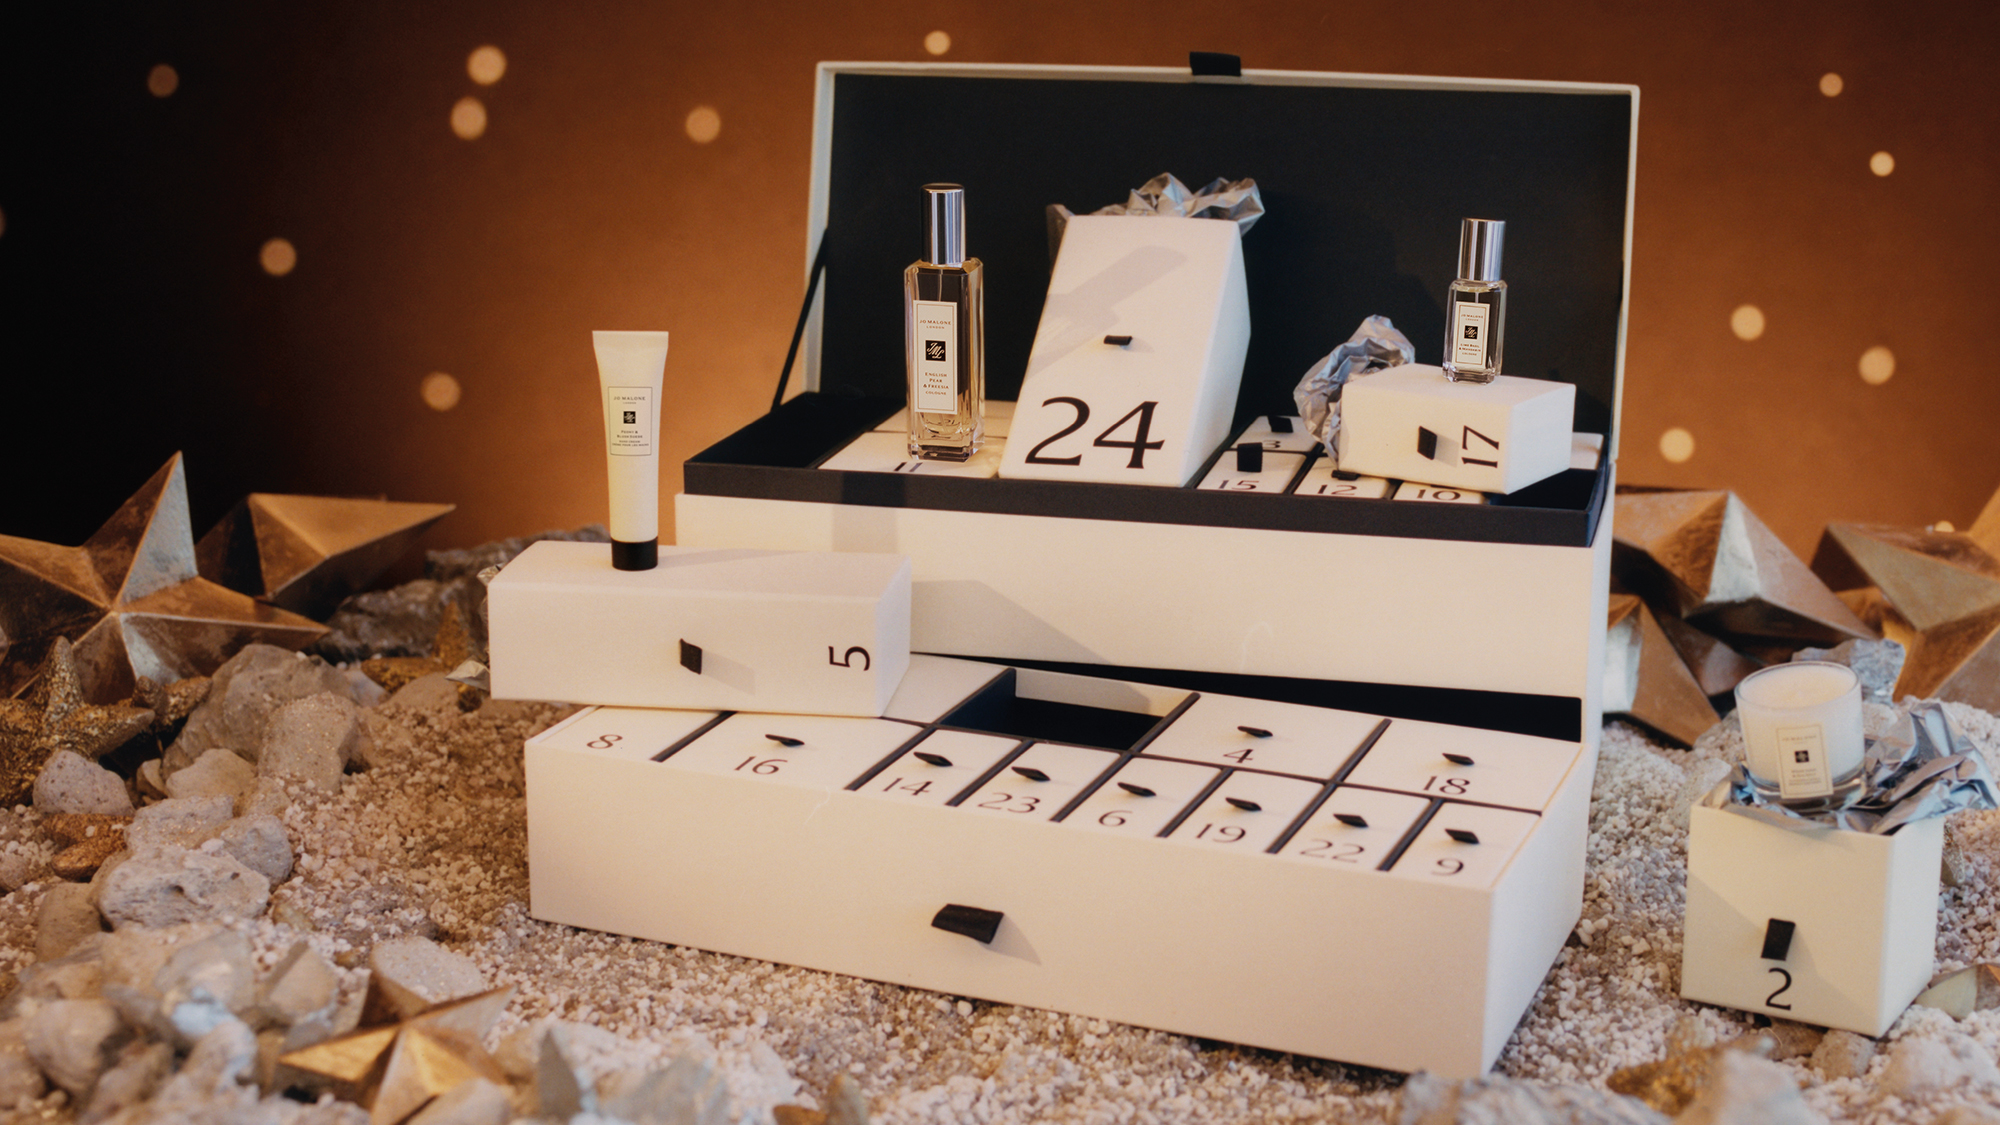 Jo Malone London Christmas Advent Calendar 2021 is out now - be quick